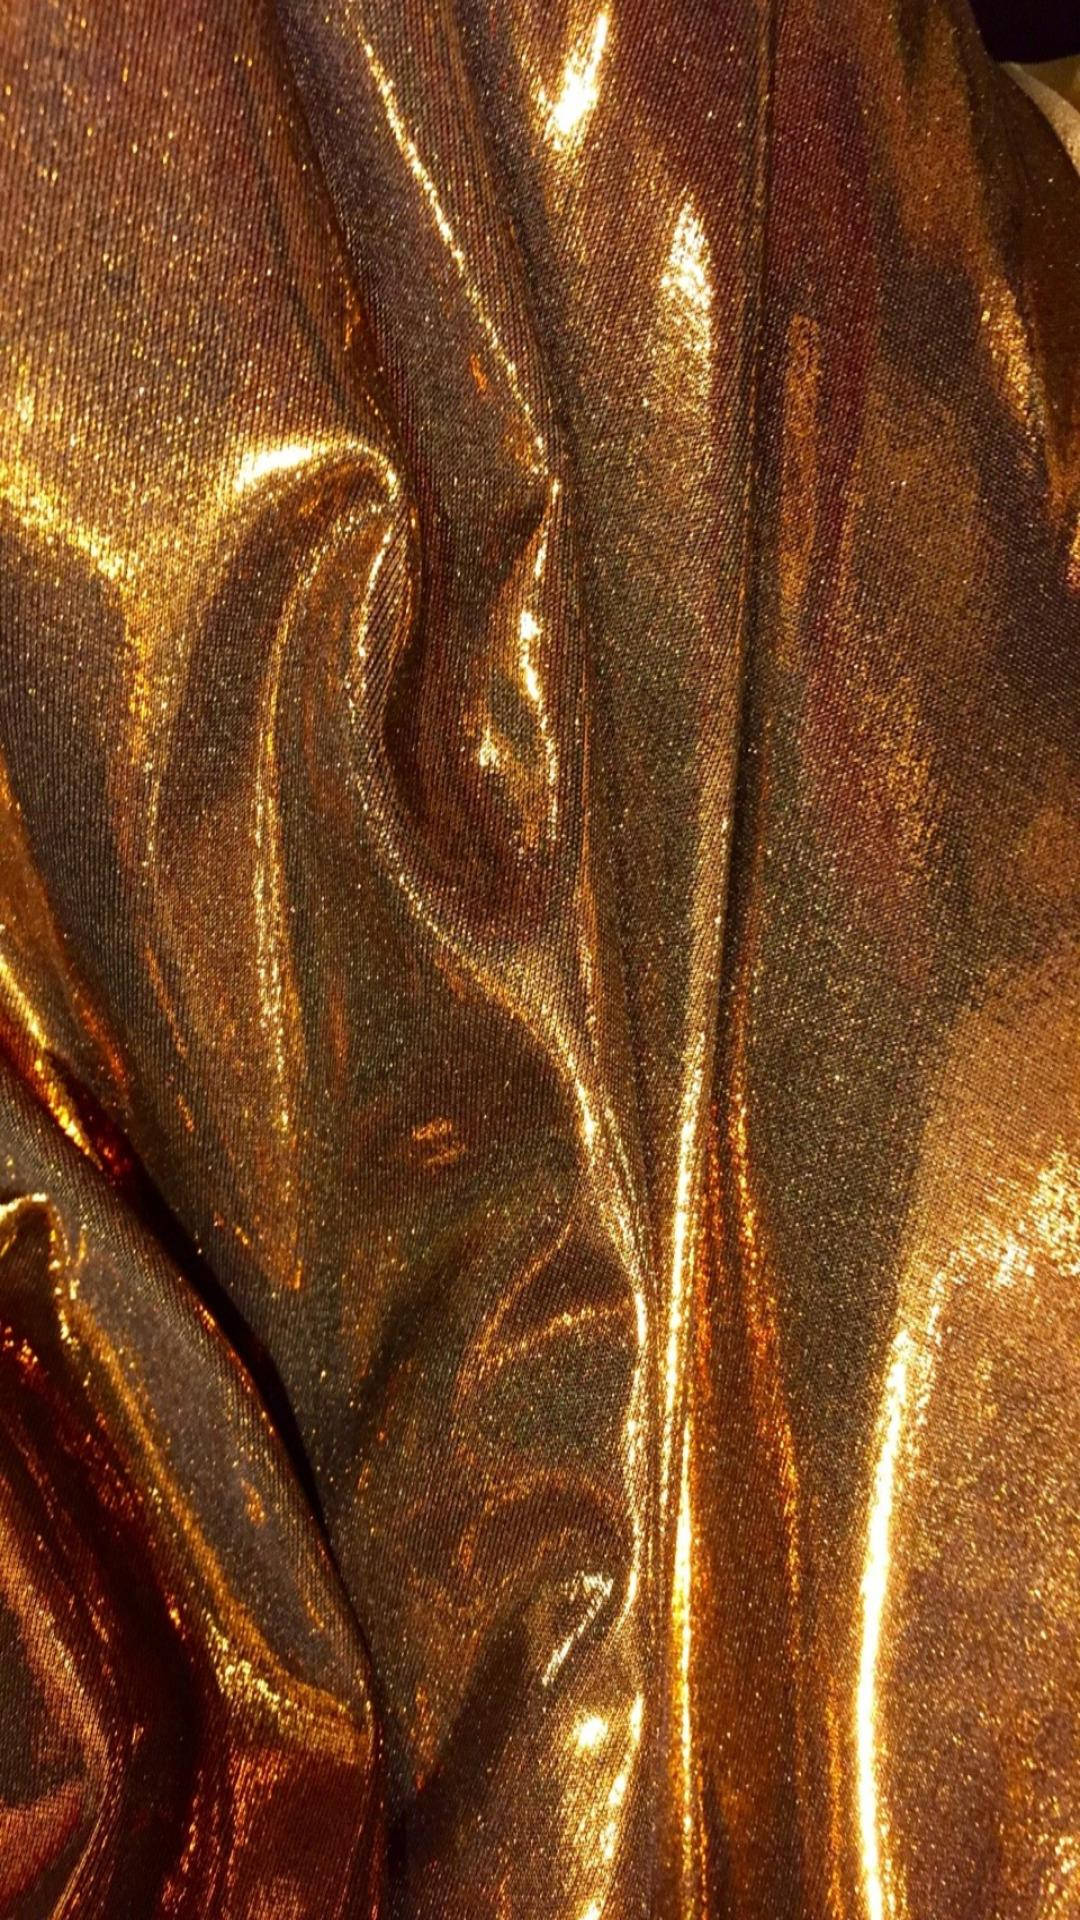 A close up of some gold and silver fabric - Gold